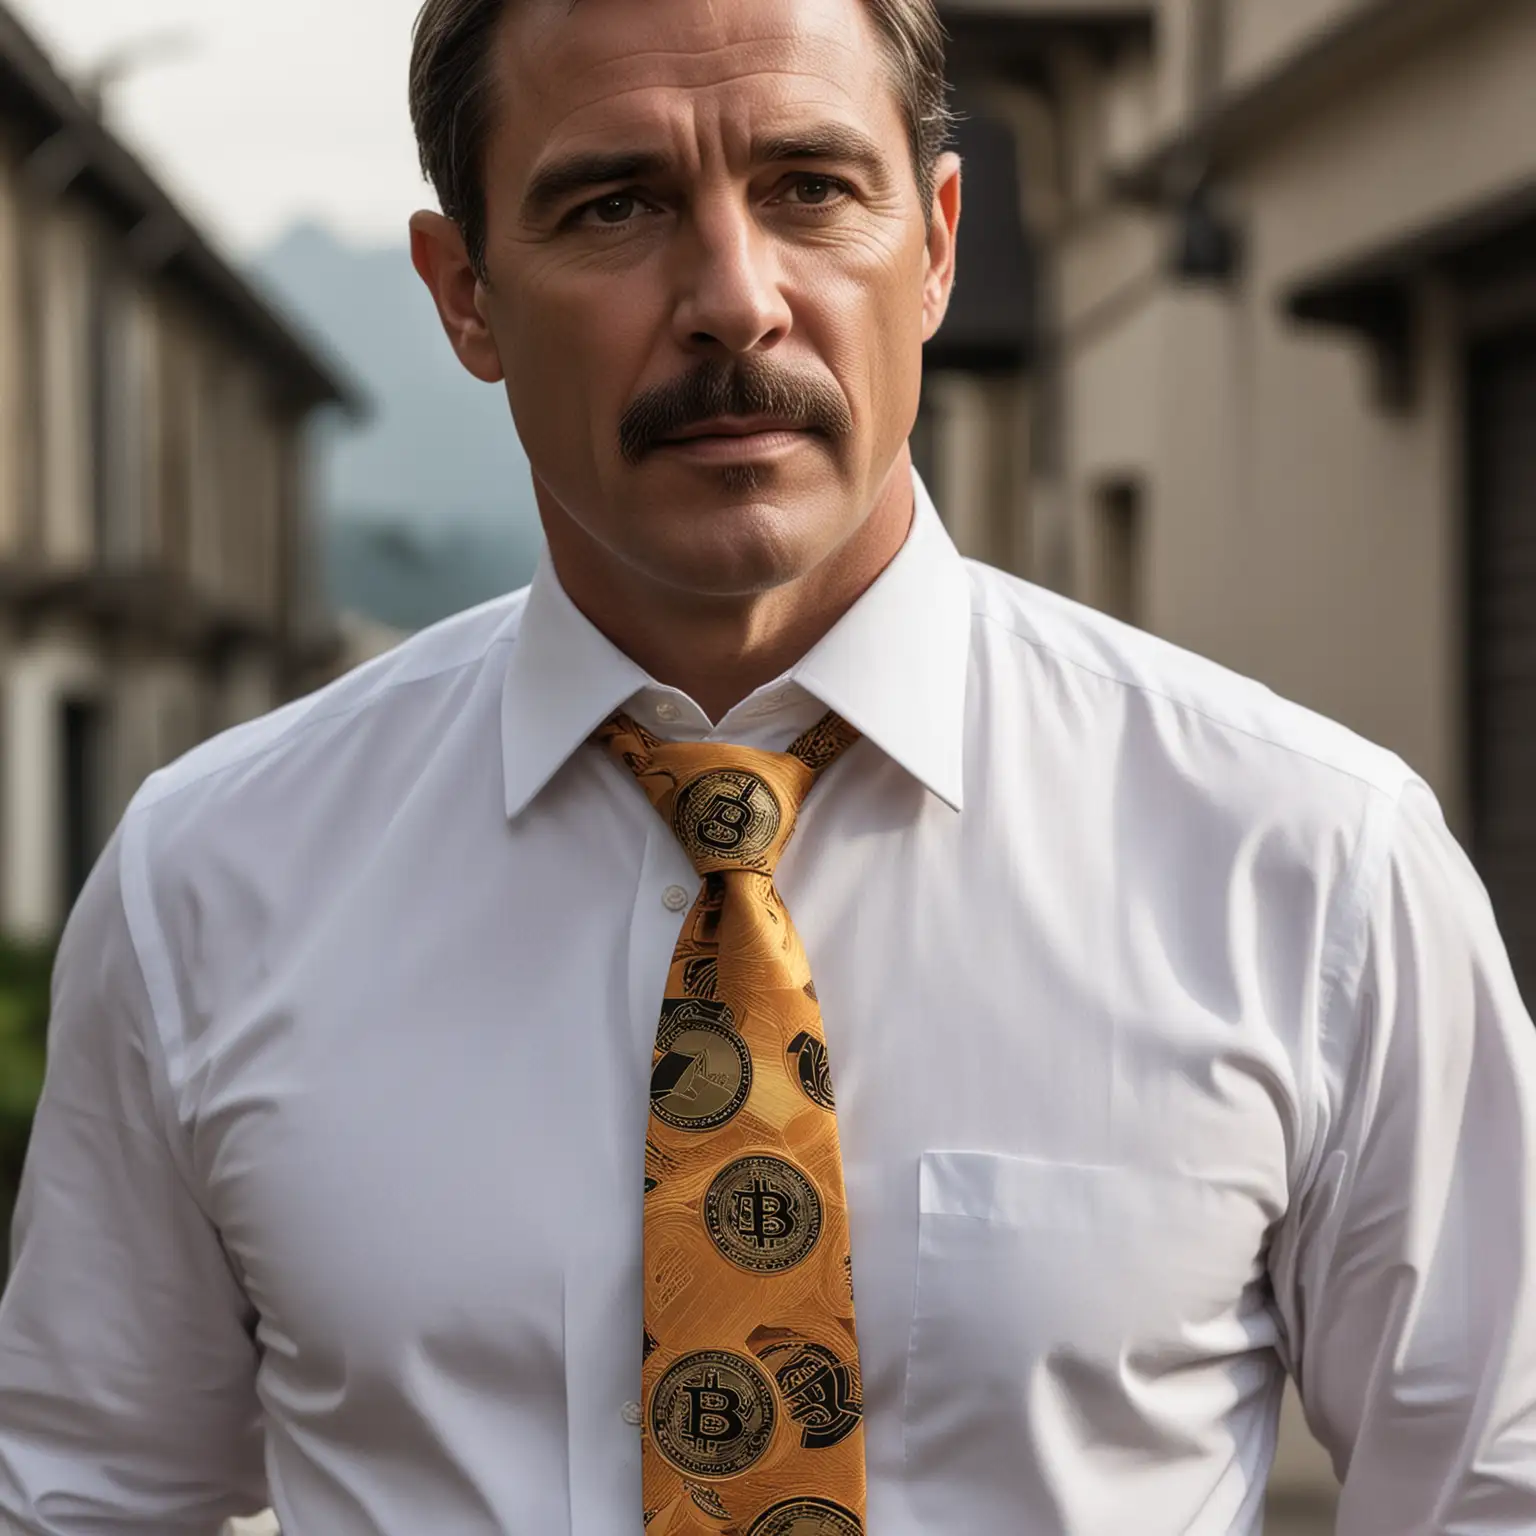 A private investigator named "Bitcoin P.I.," like the characters James Bond 007 and Magnum P.I., also show a subtle display of the digital Blockchain pattern on his tie